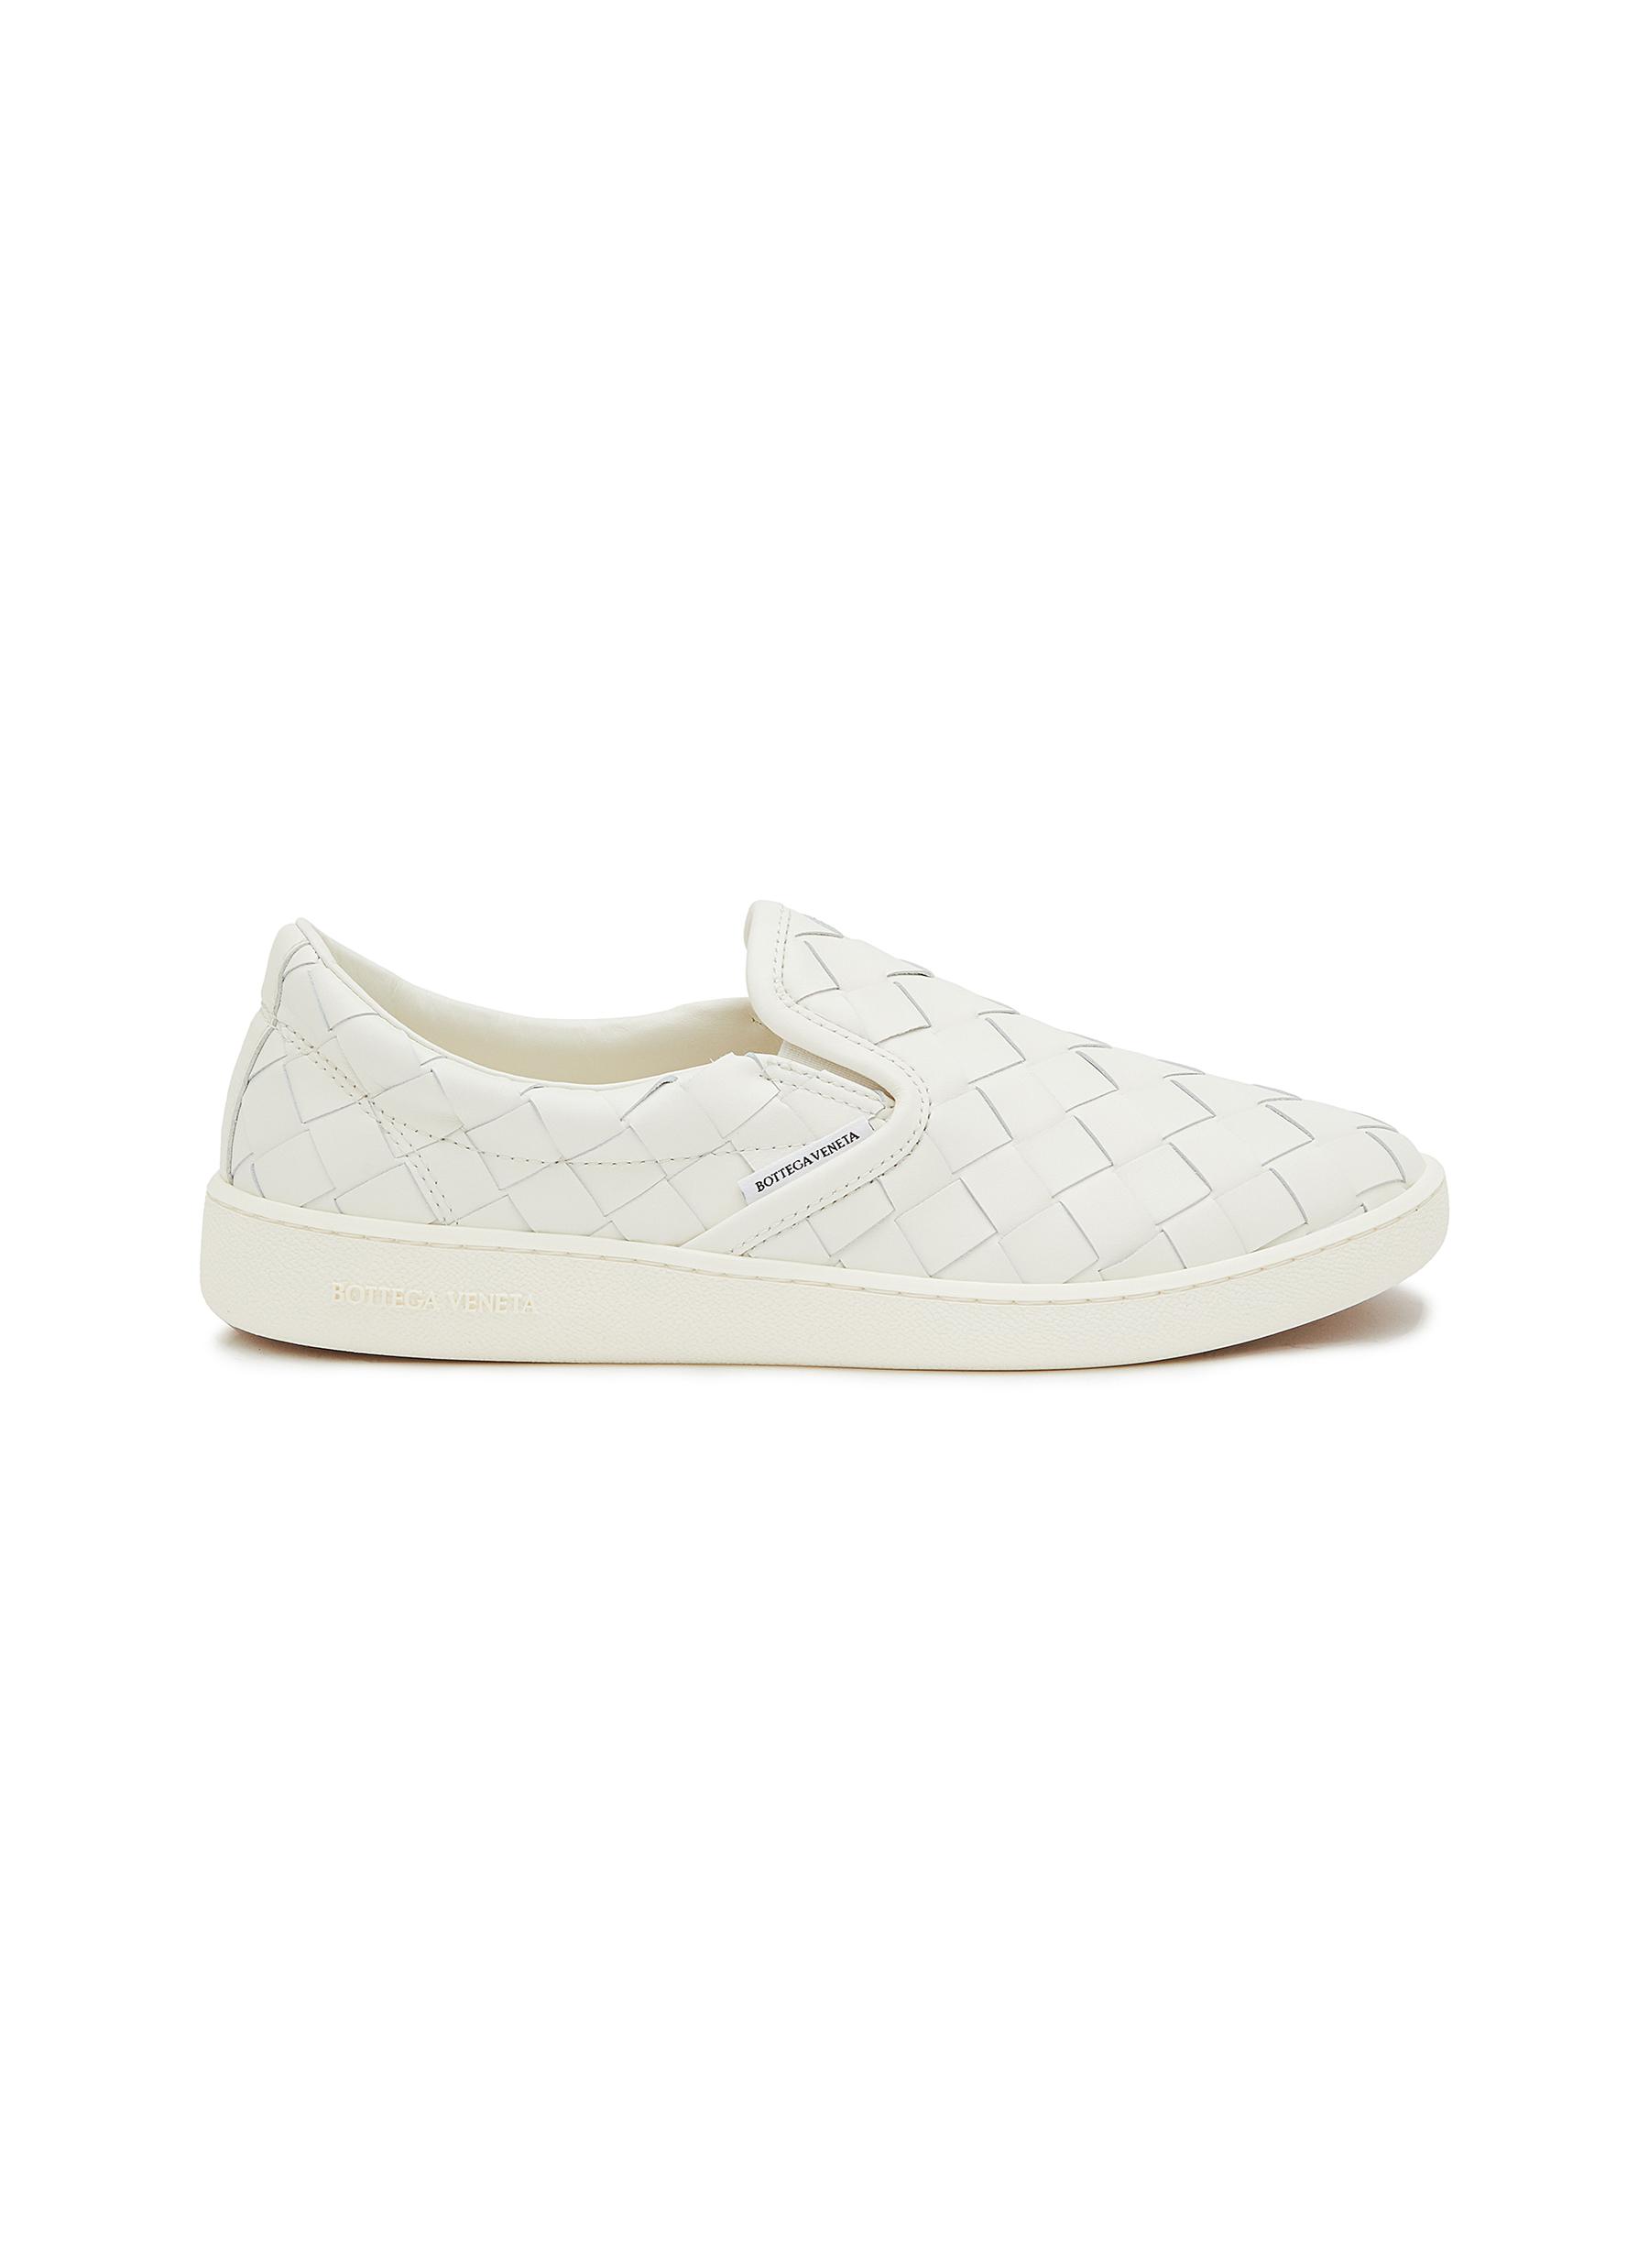 Sawyer Leather Slip-On Sneakers